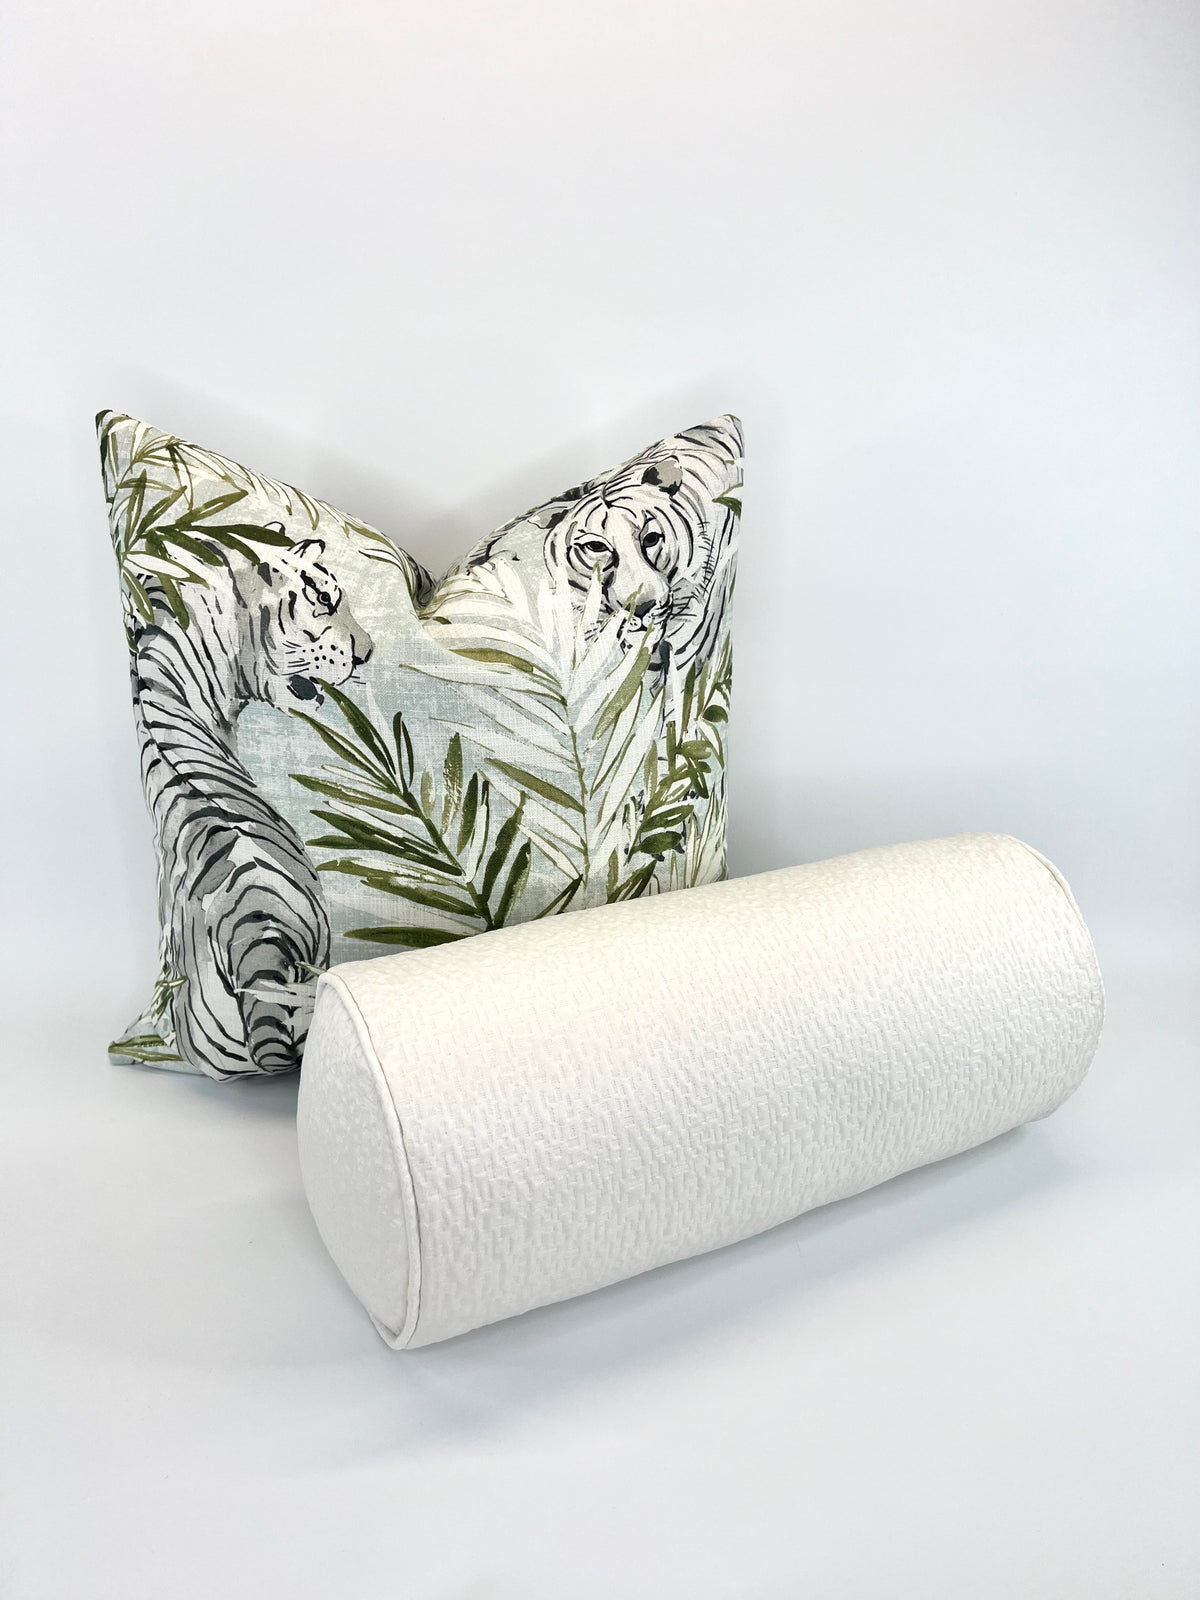 Decorative Pillow Cover in Tropical Tiger in Spa